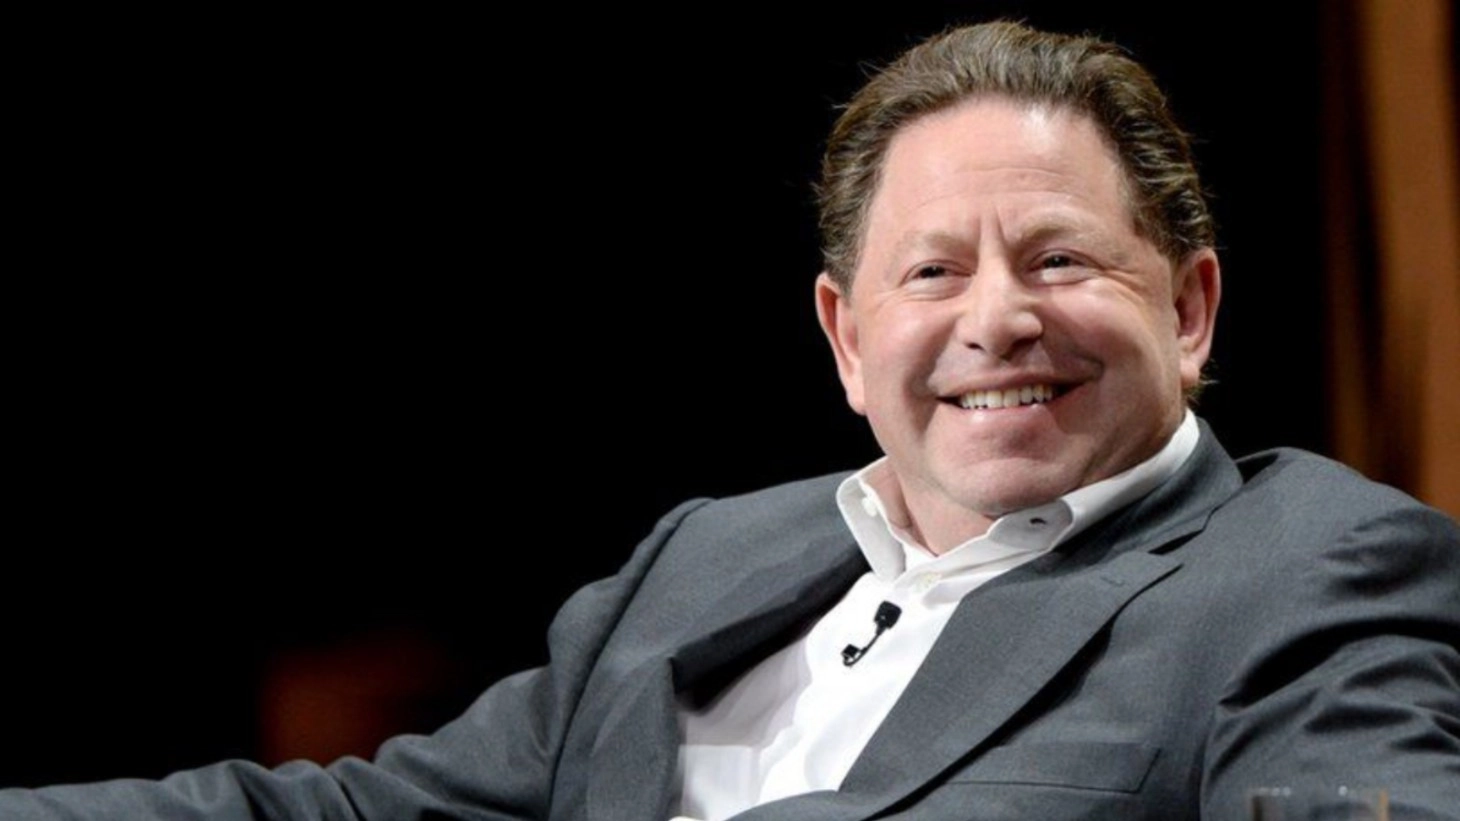 Kotick to Remain CEO of Activision Blizzard till 2023